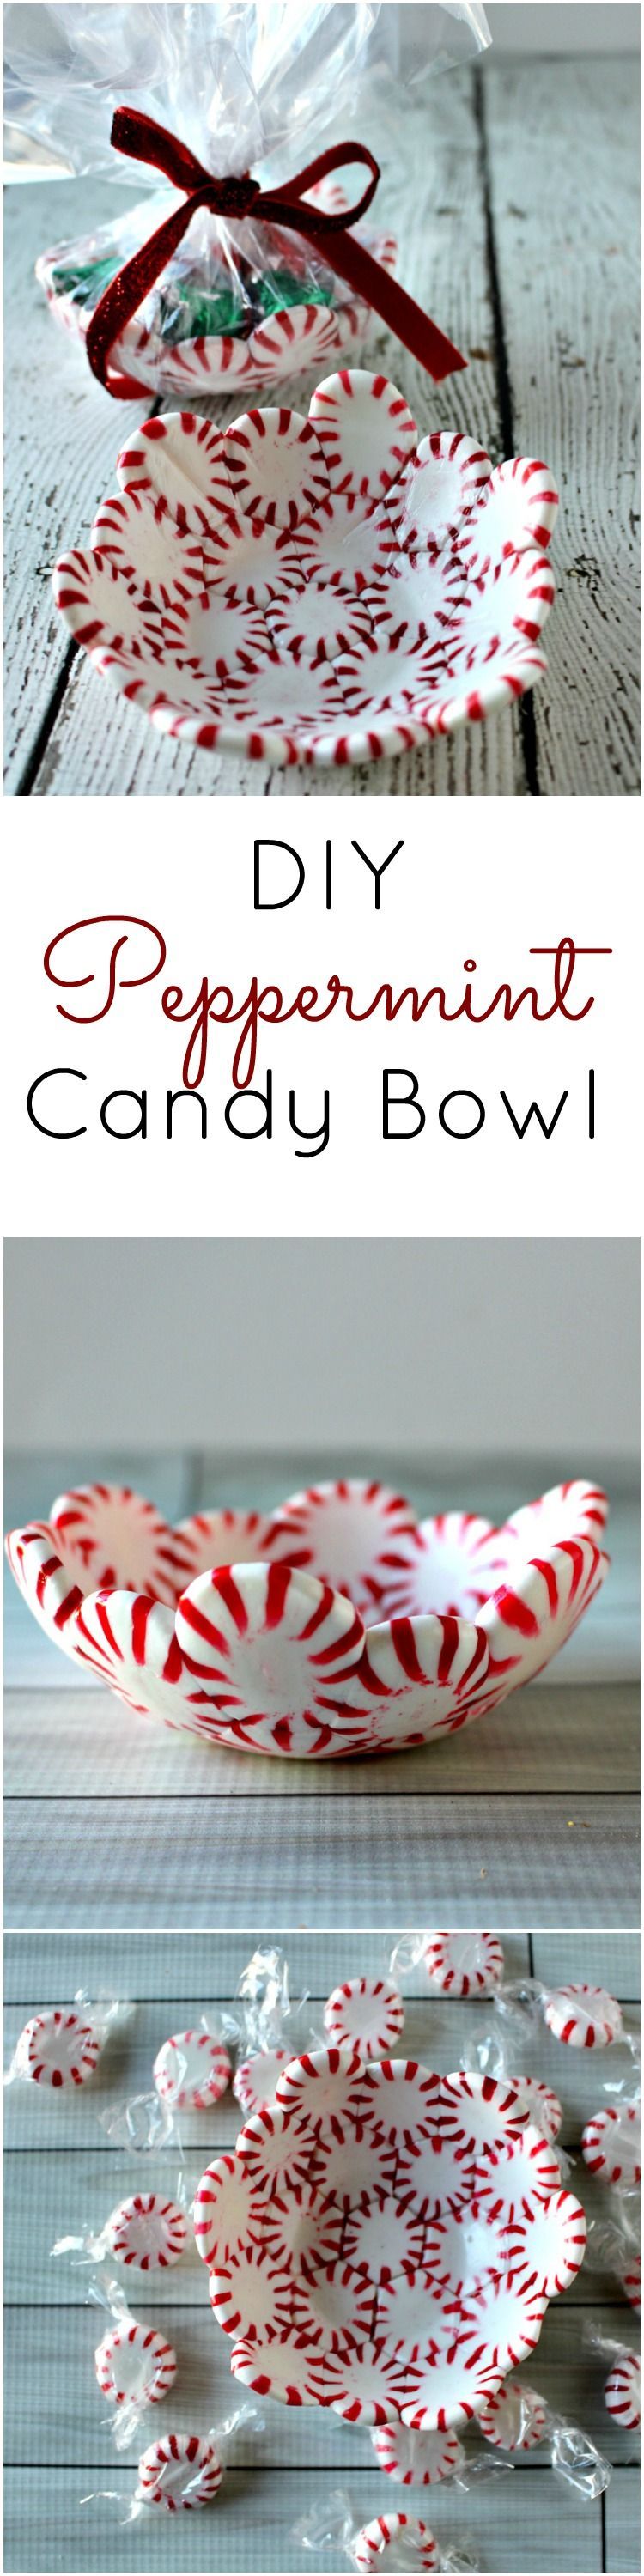 DIY Peppermint Candy Bowl – The perfect (and easiest) DIY Christmas Gift